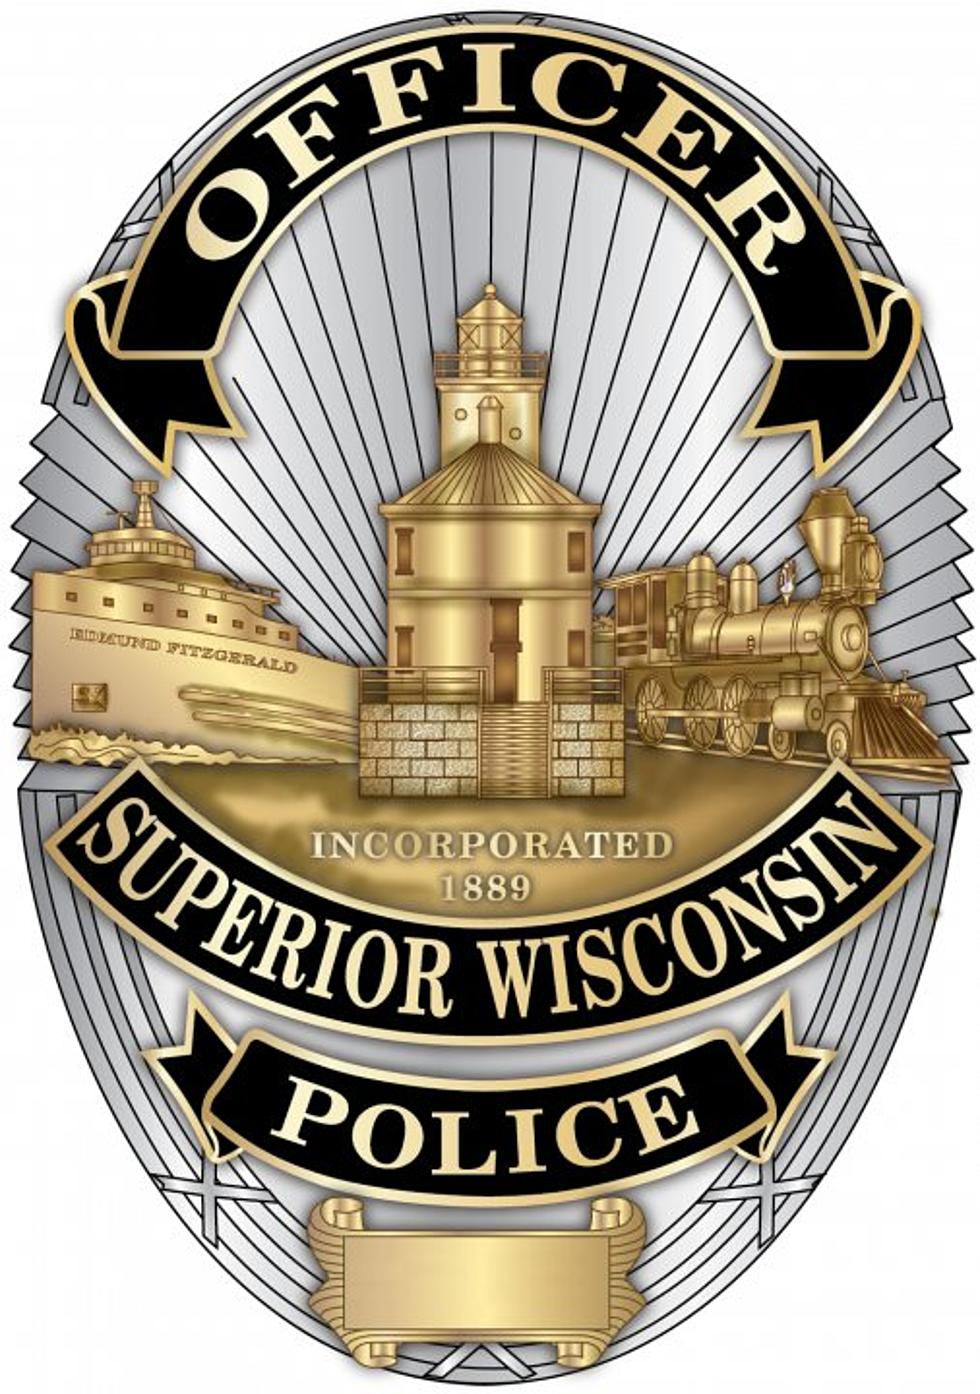 Superior Police Department Looking For Volunteers For Their Citizen Watch Groups